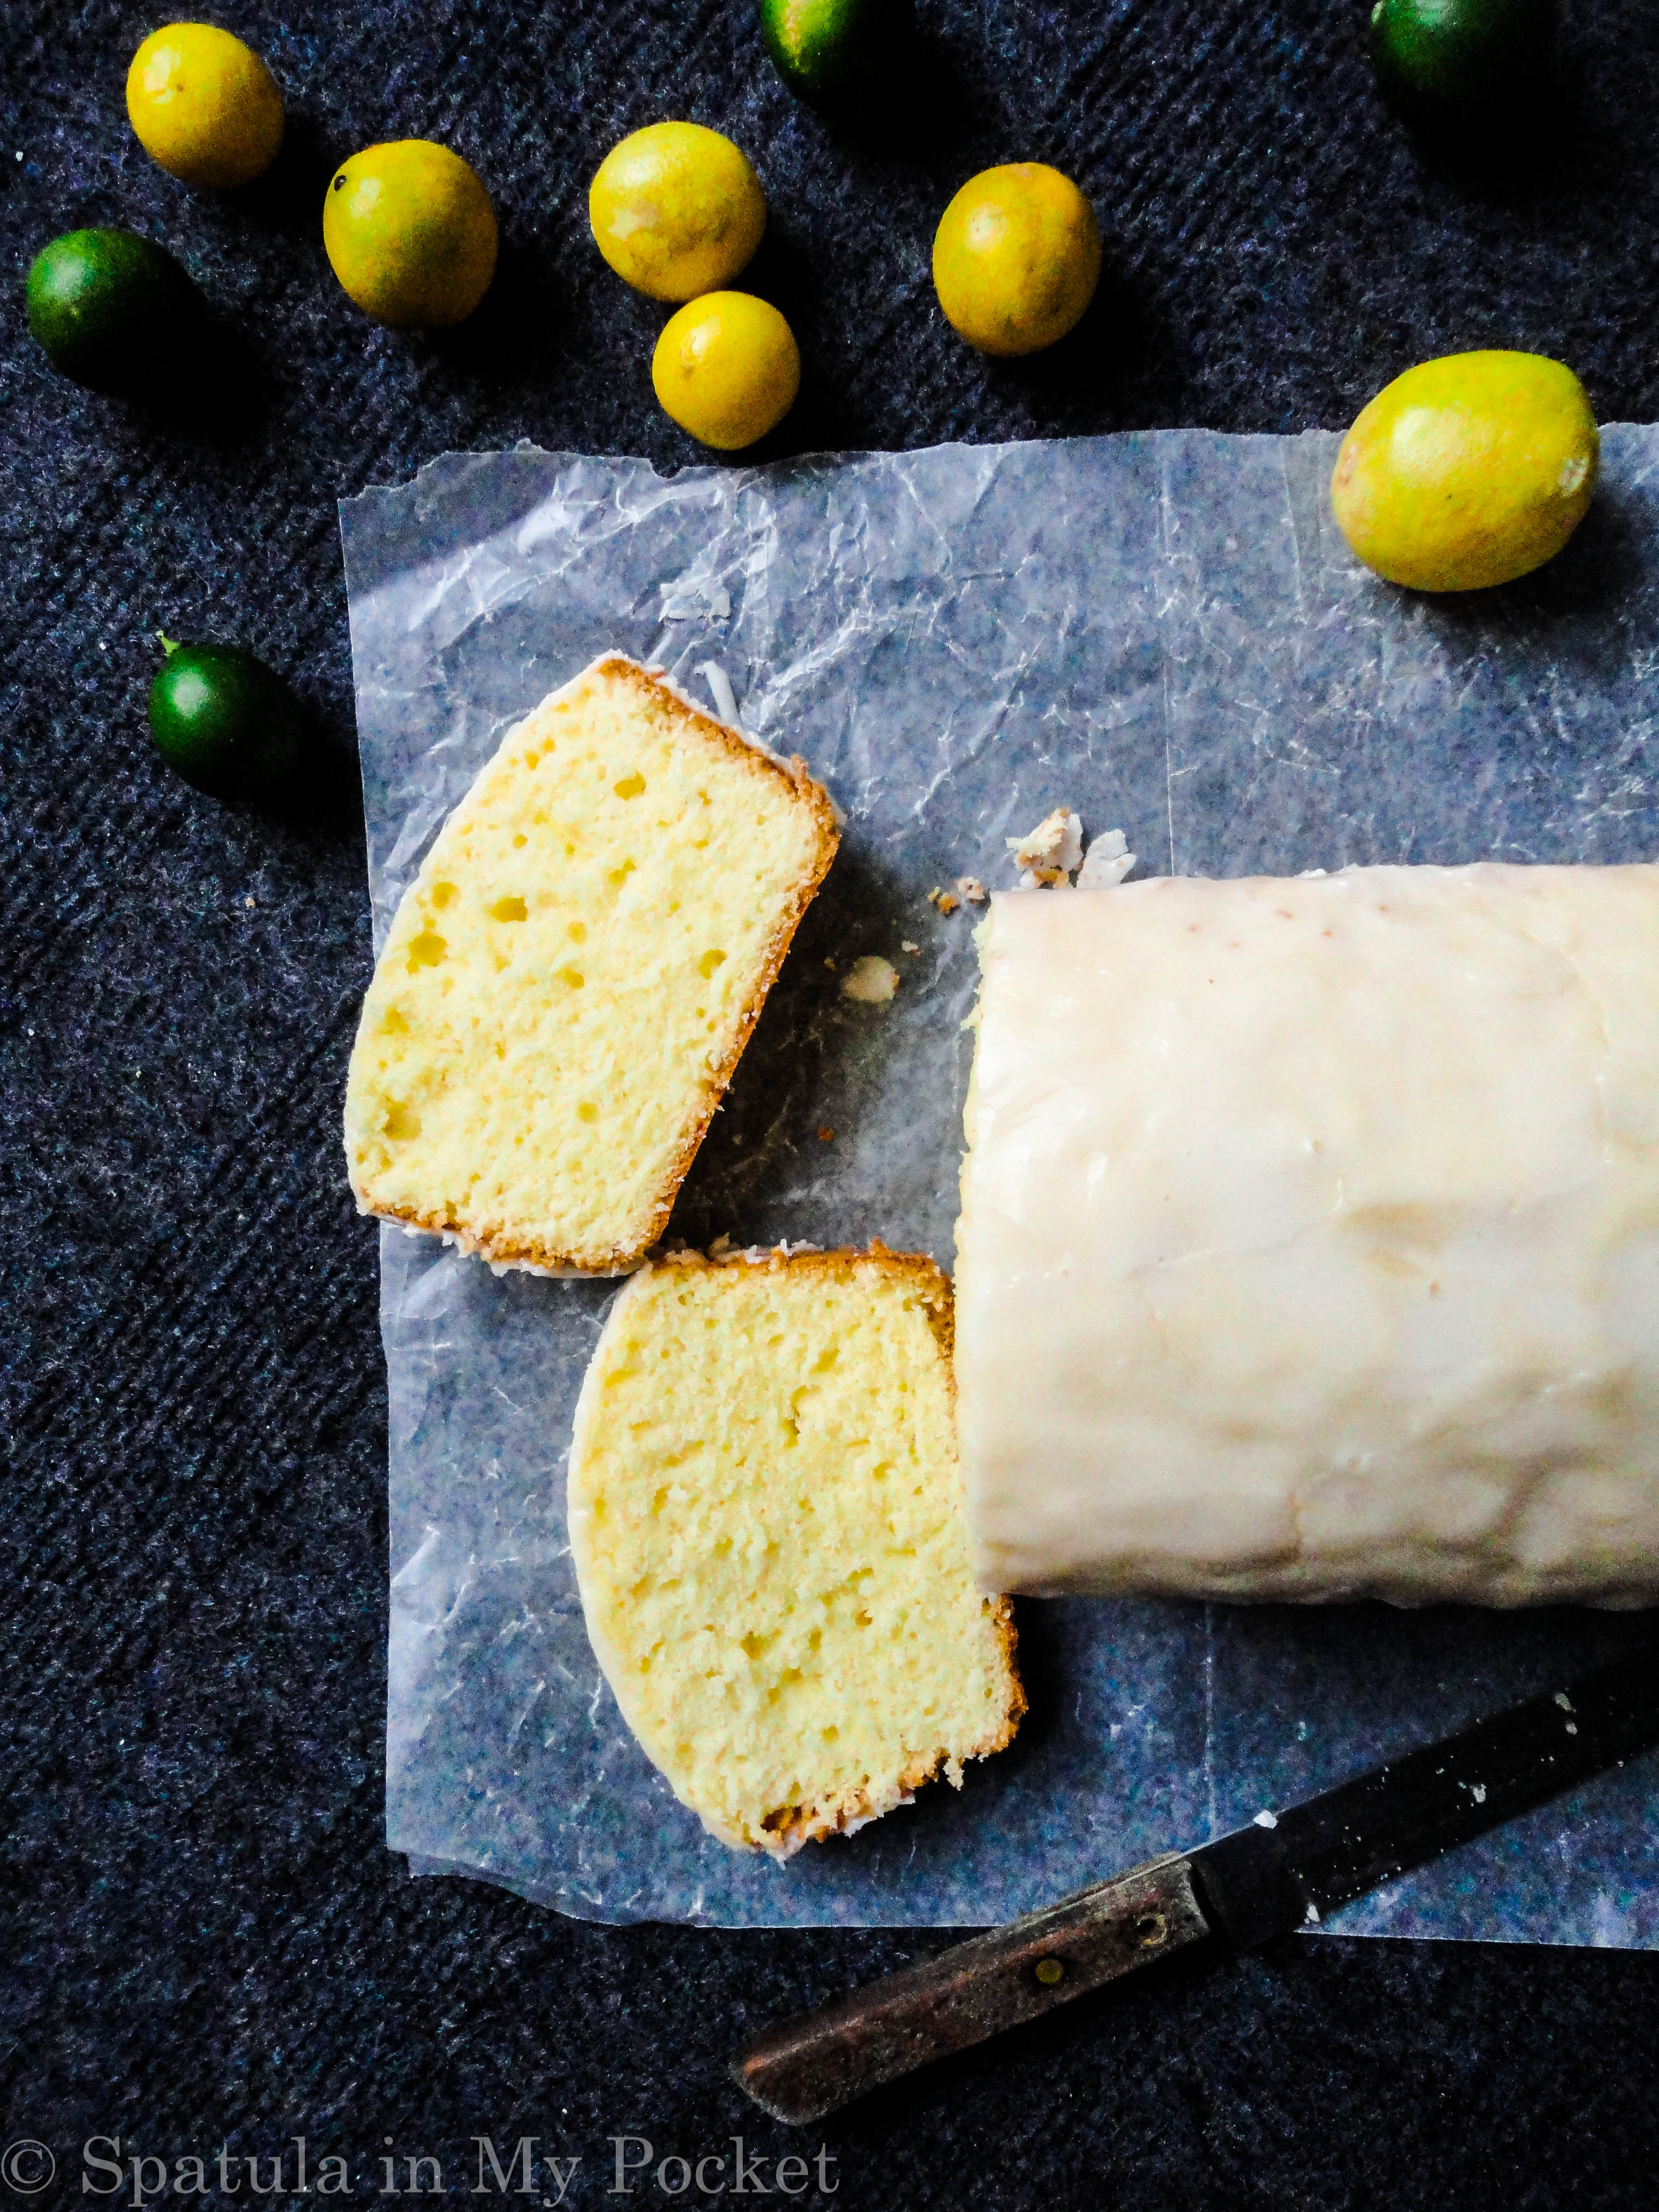 This super tender, delicious lemon pound cake makes for a perfect evening snack.